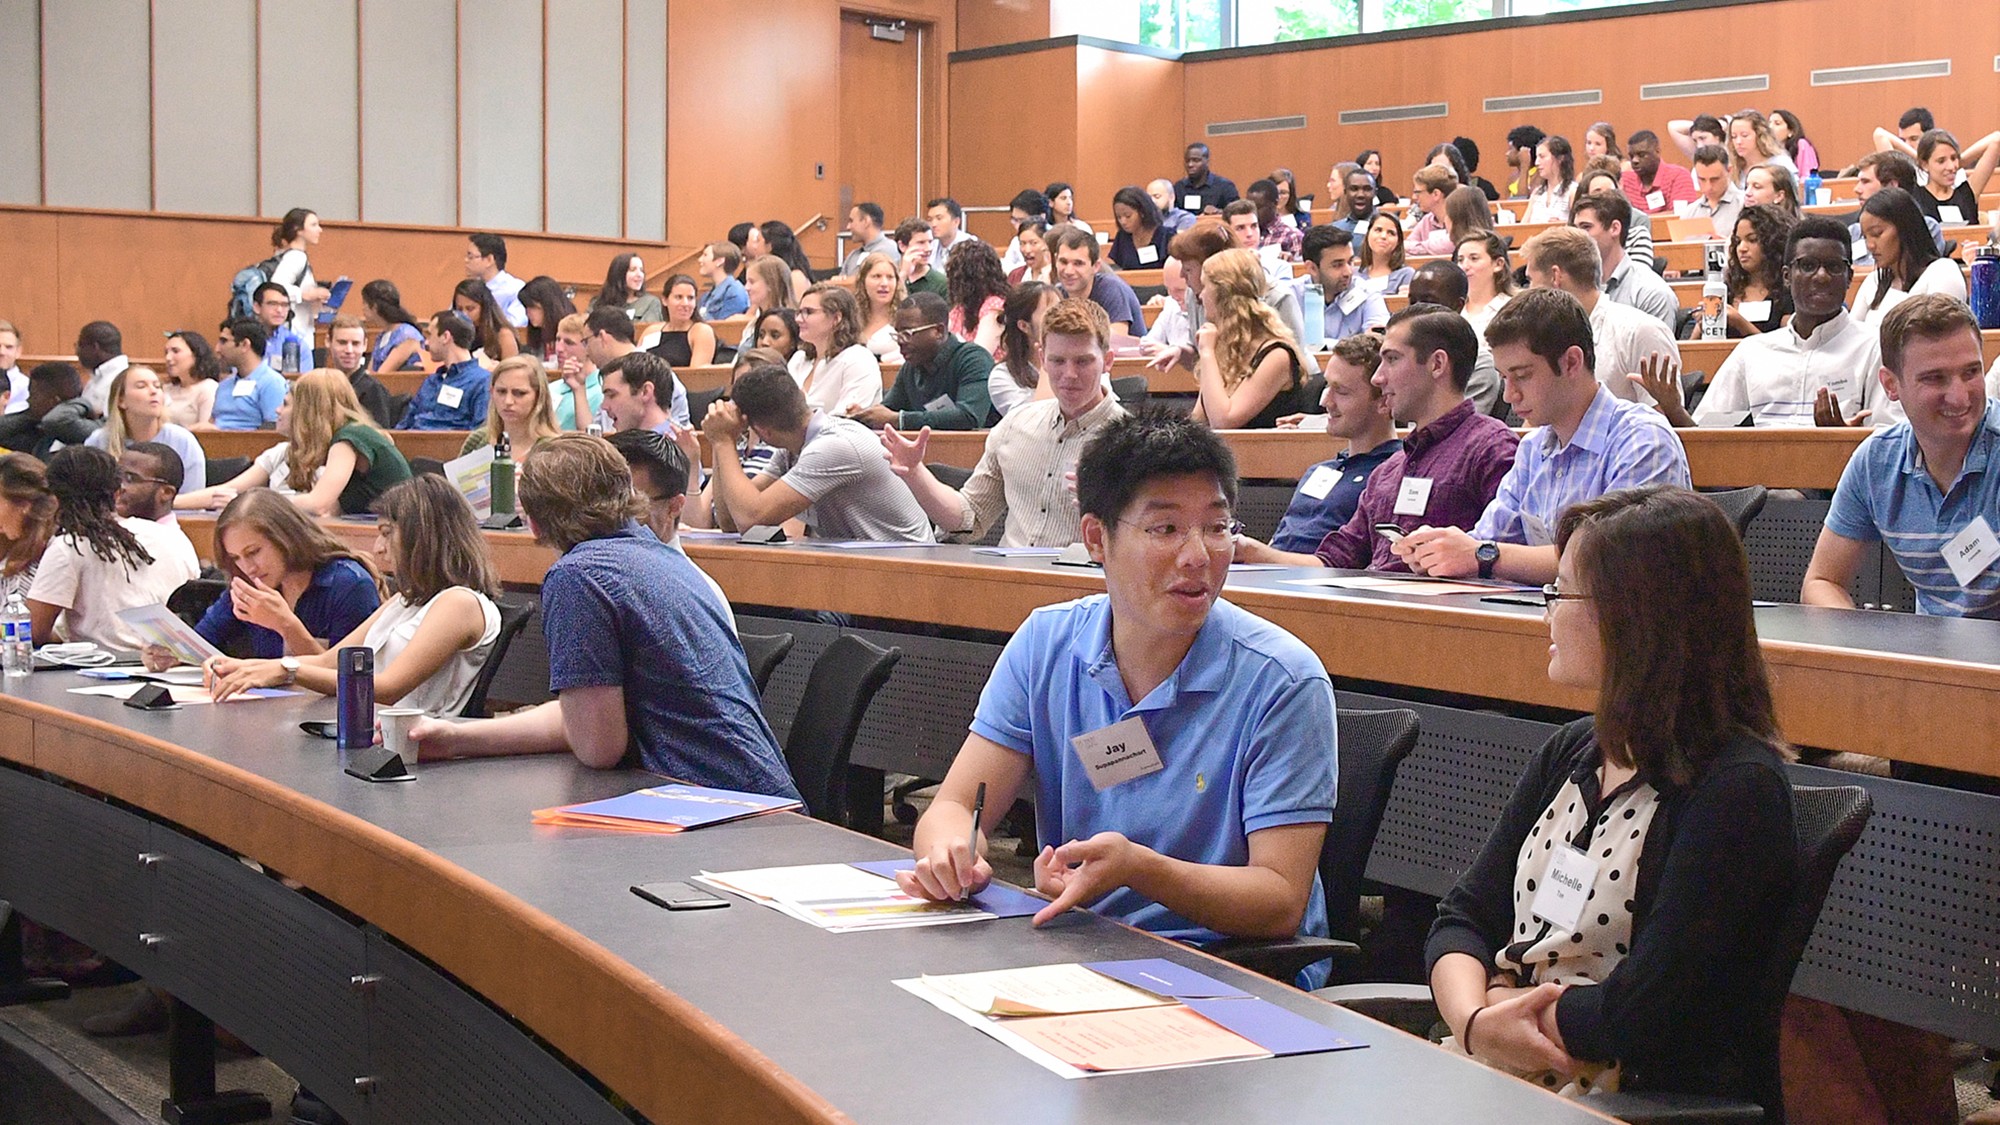 Group of medical students sitting in a lecture hall collaborating